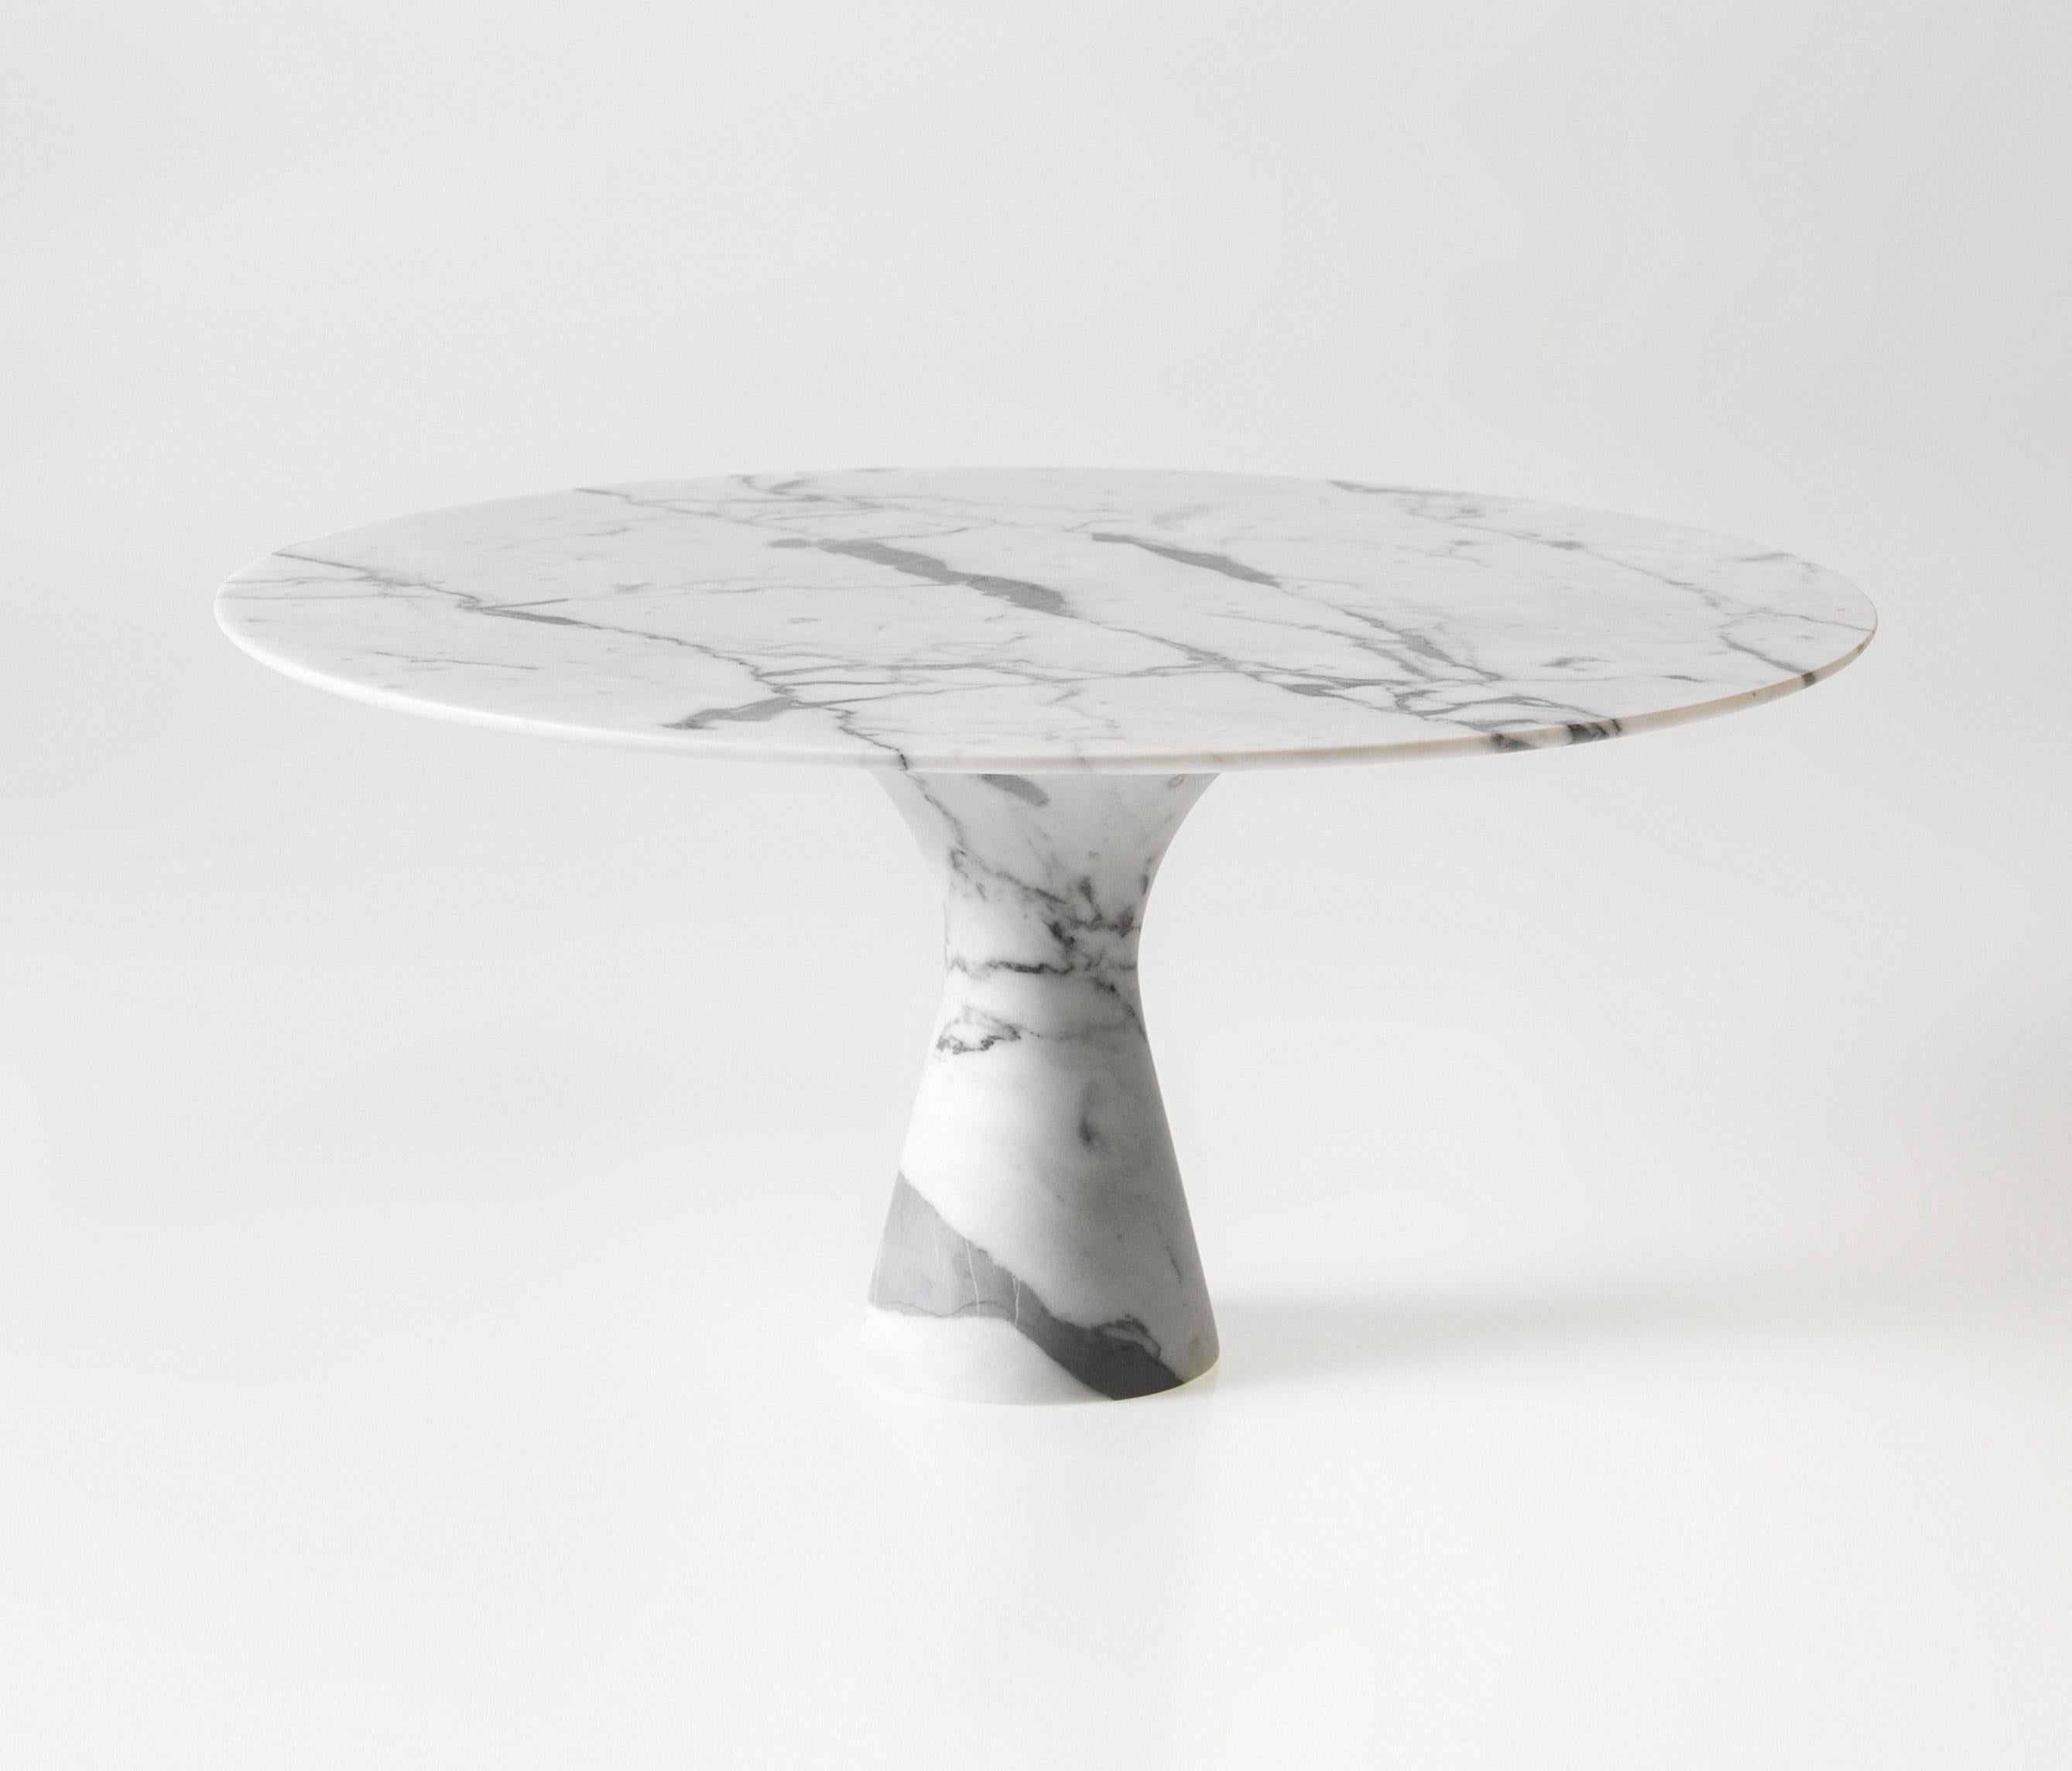 Bianco Statuarietto refined contemporary marble low round table 27/100
Dimensions: 100 x H 27 cm
Materials: Bianco Statuarietto
Available in Kyknos, Grafite, Travertino Rosso, Grey Saint Laurent, Picasso green, Port Saint Laurent, Travertino